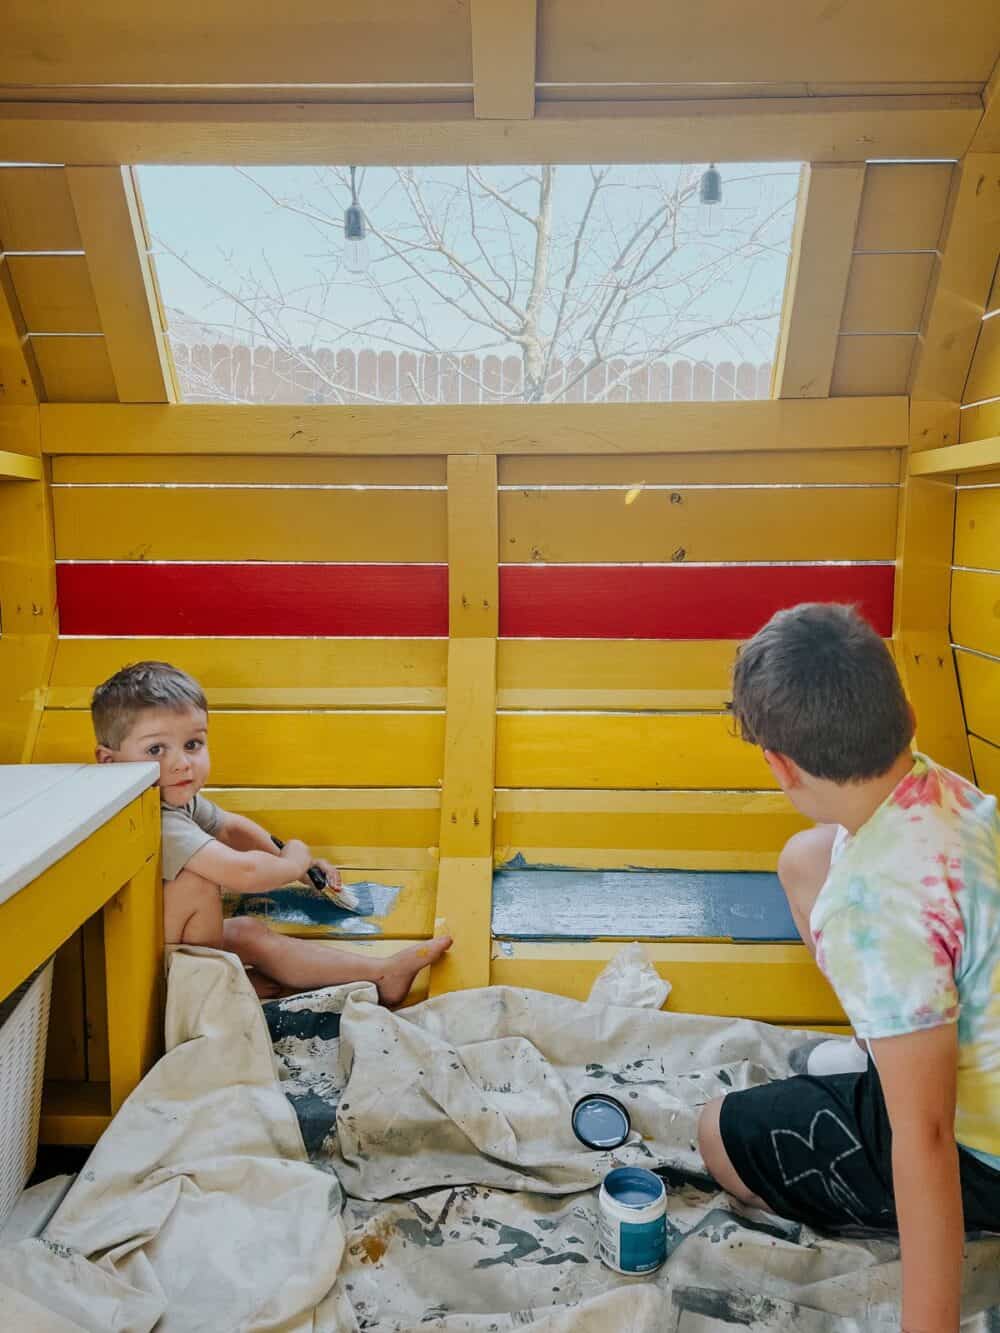 Two young boys painting in a playhouse